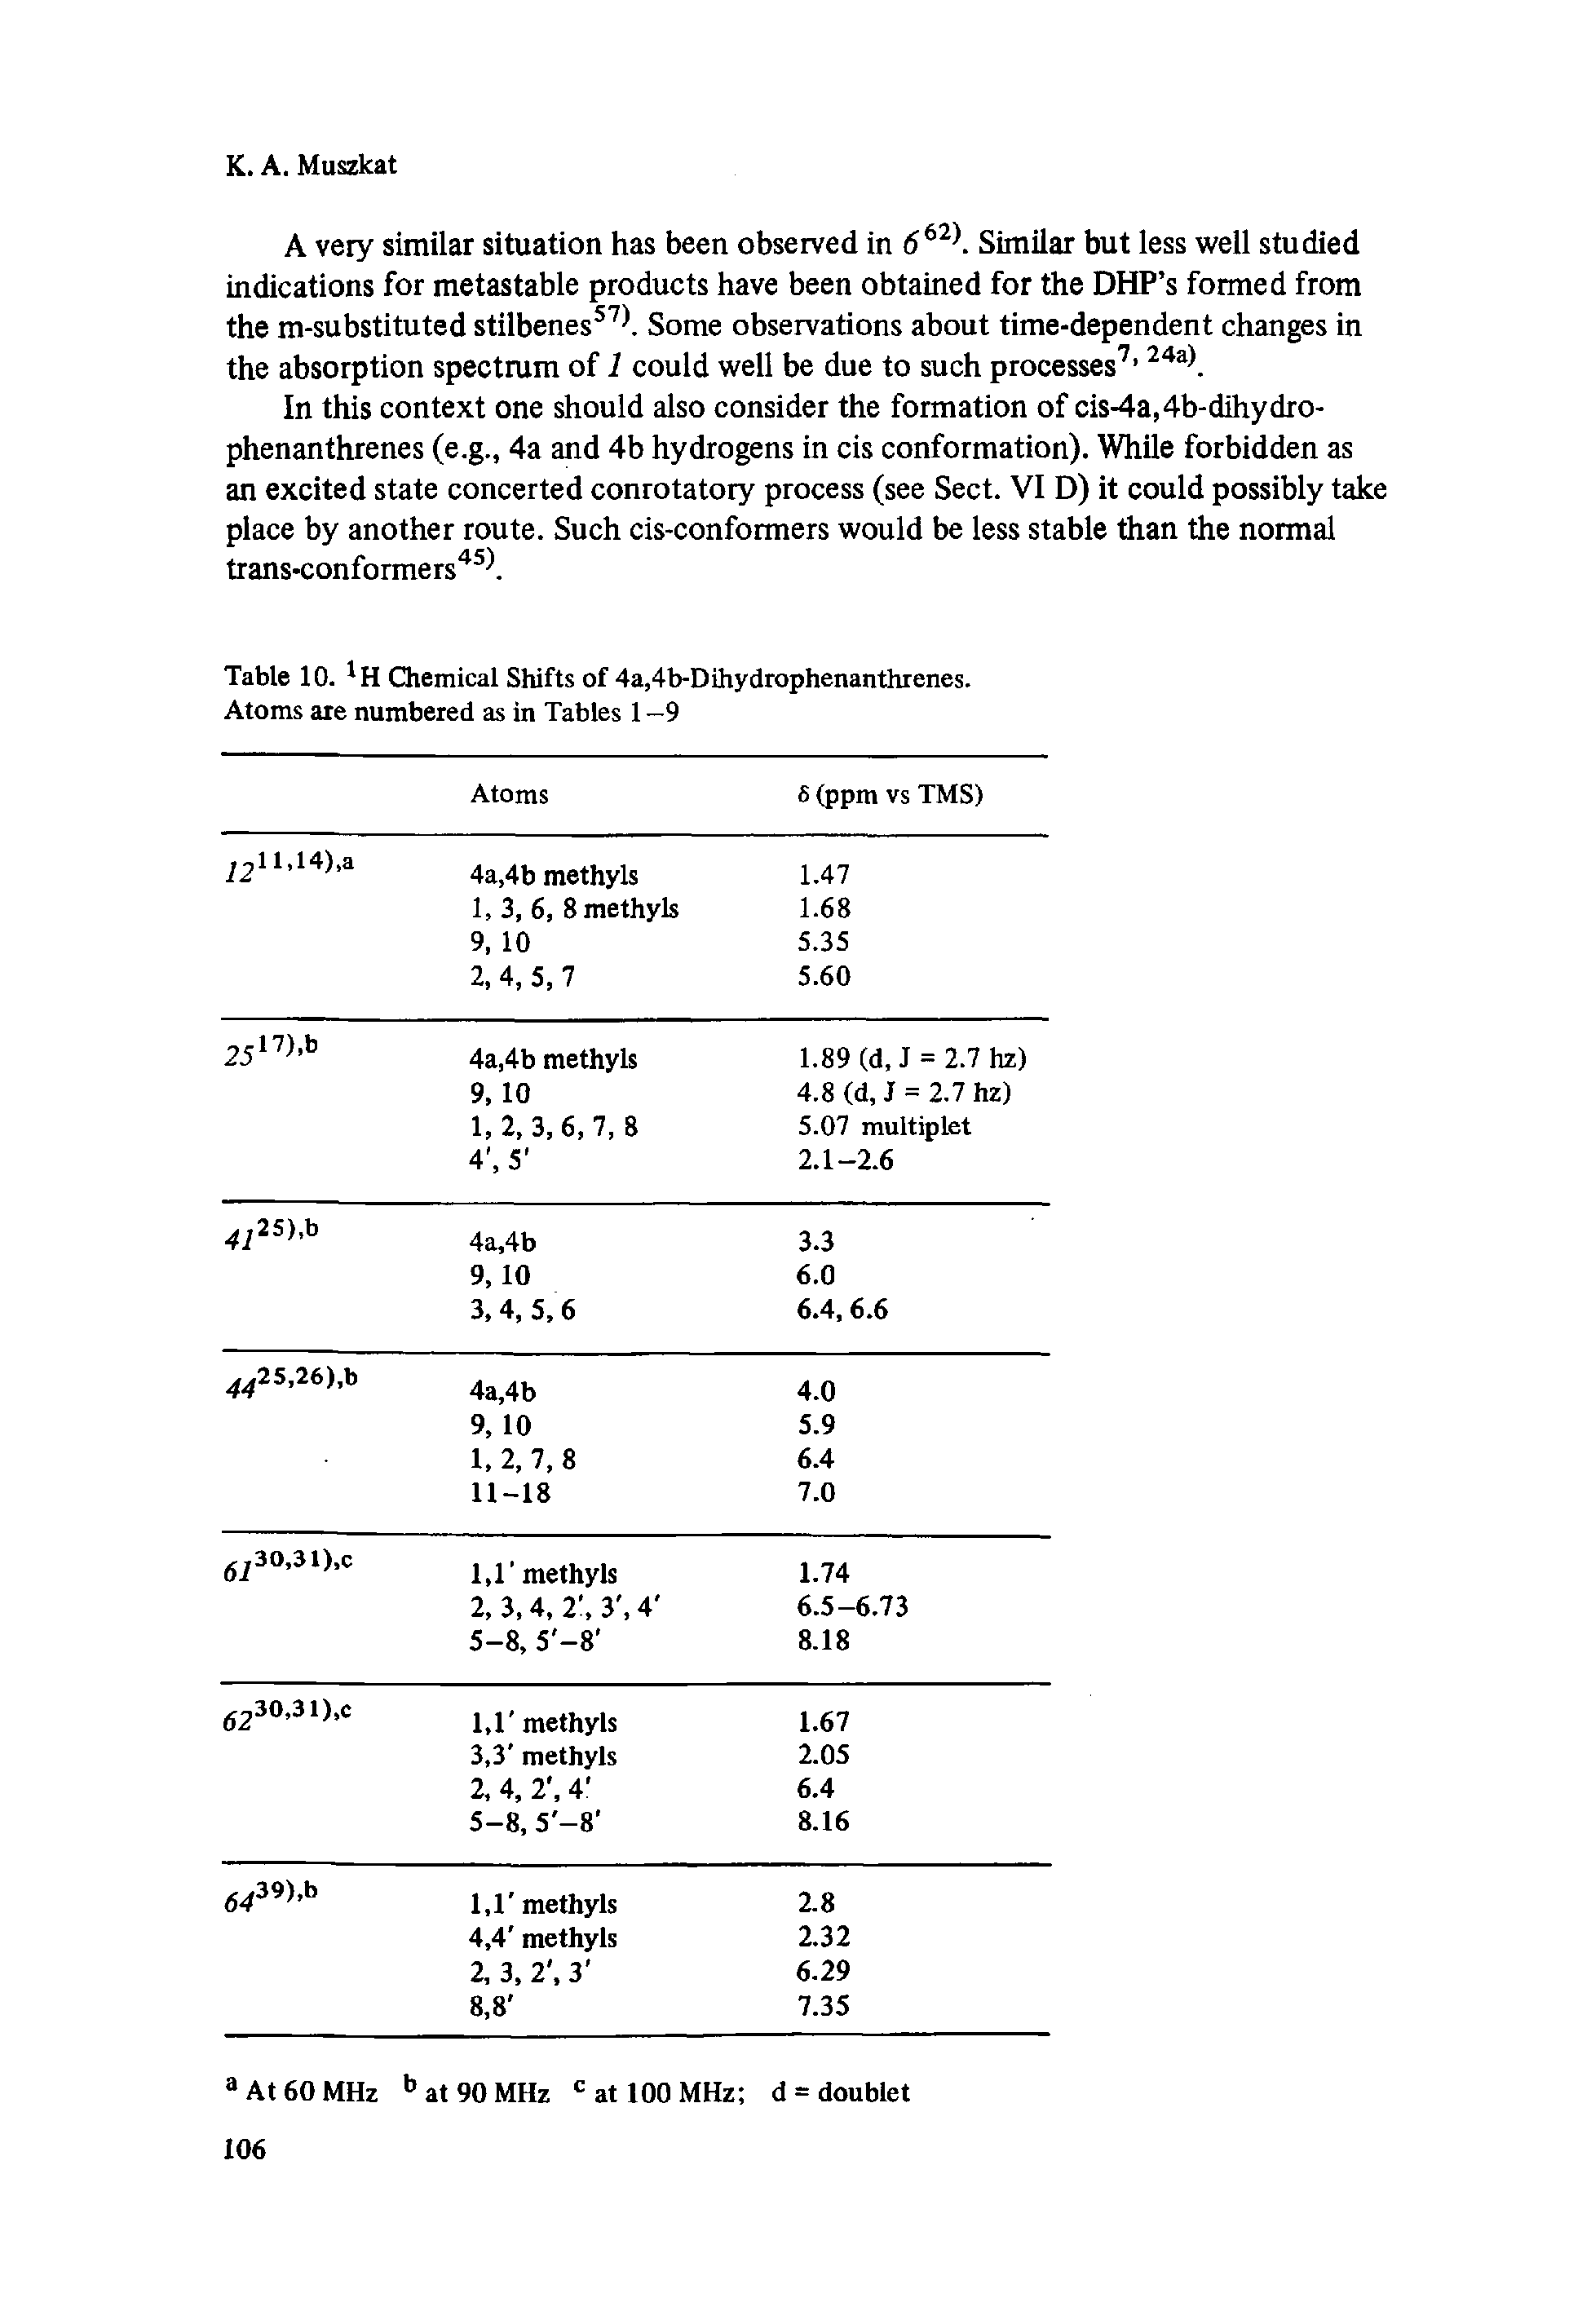 Table 10. Chemical Shifts of 4a,4b-Dihydrophenanthrenes. Atoms are numbered as in Tables 1 —9...